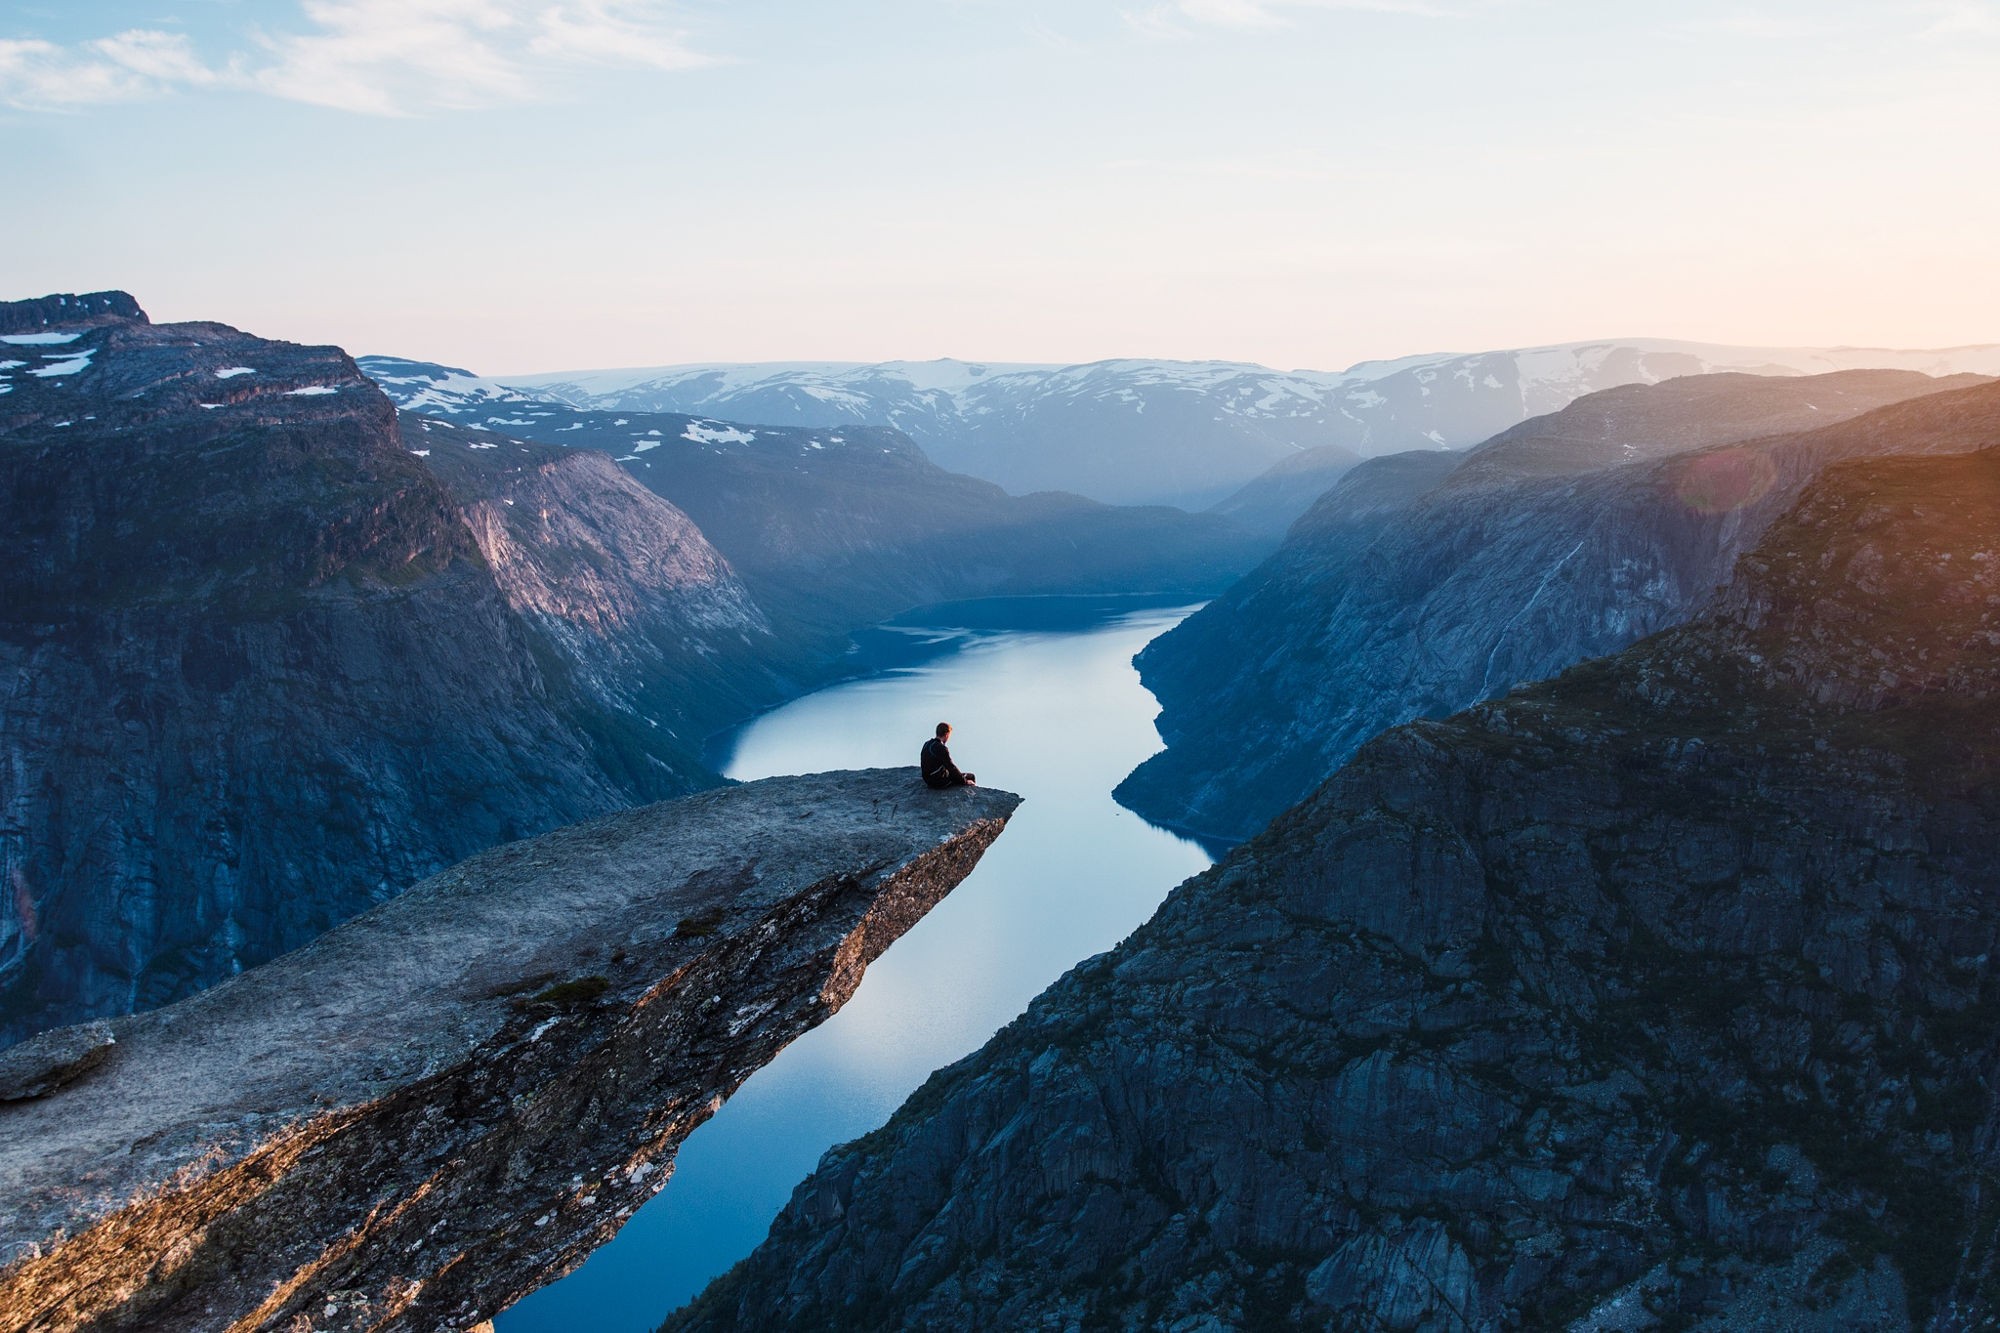 General 2000x1333 sunset water sky mountains clouds Norway Trolltunga people nordic landscapes nature landscape alone